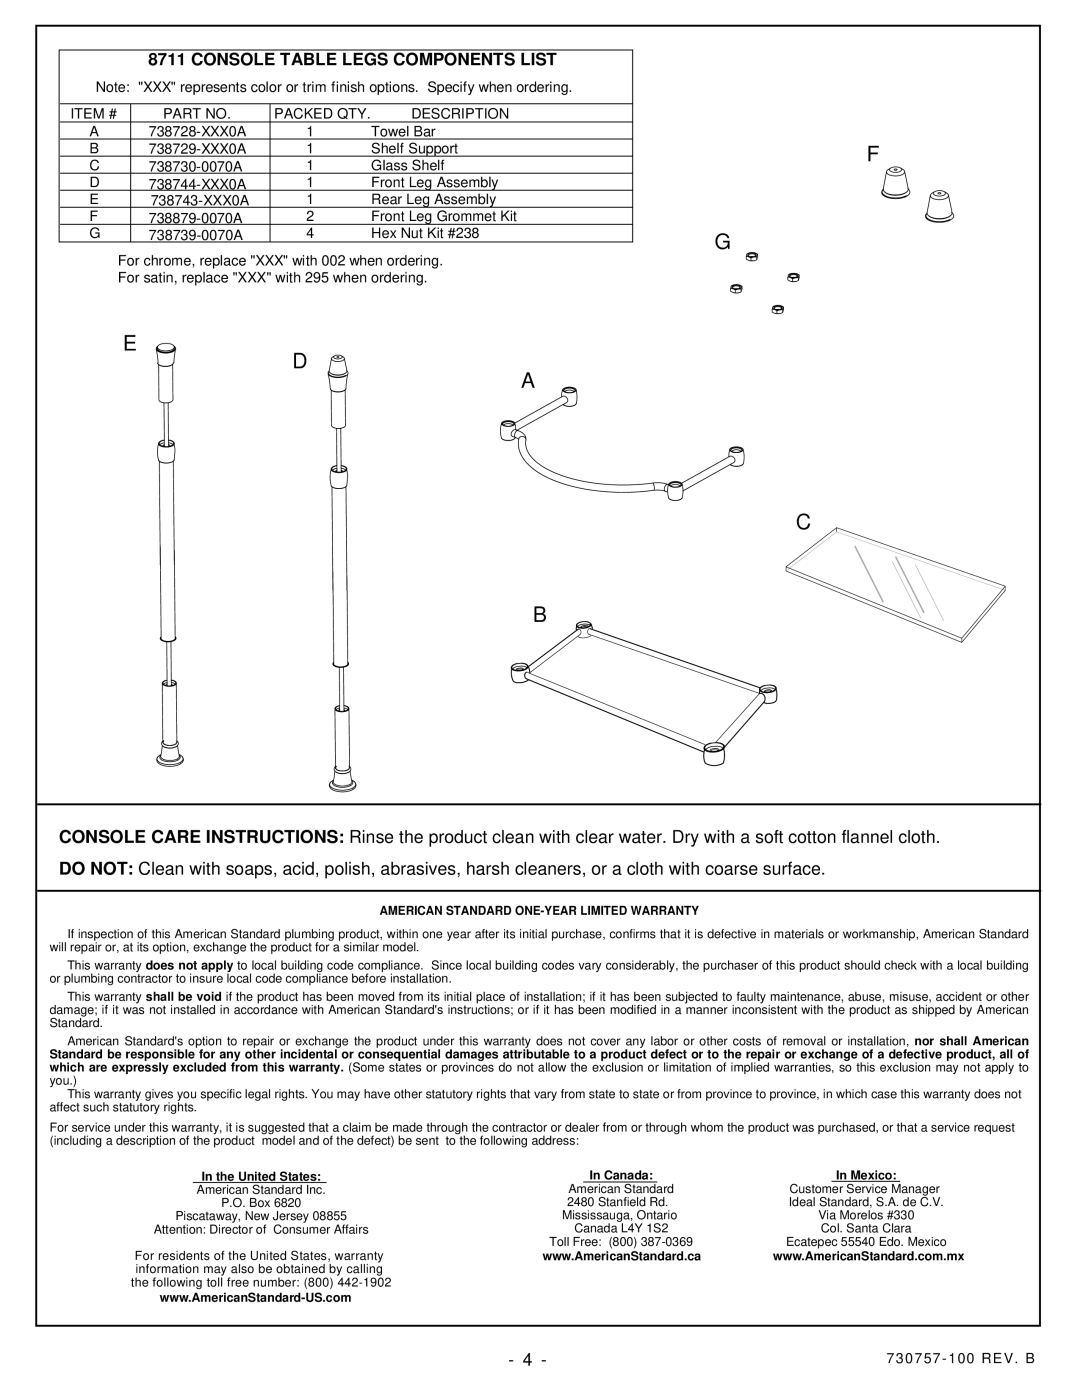 American Standard 7812.295, 7812.002 installation instructions E D A C B, Console Table Legs Components List 